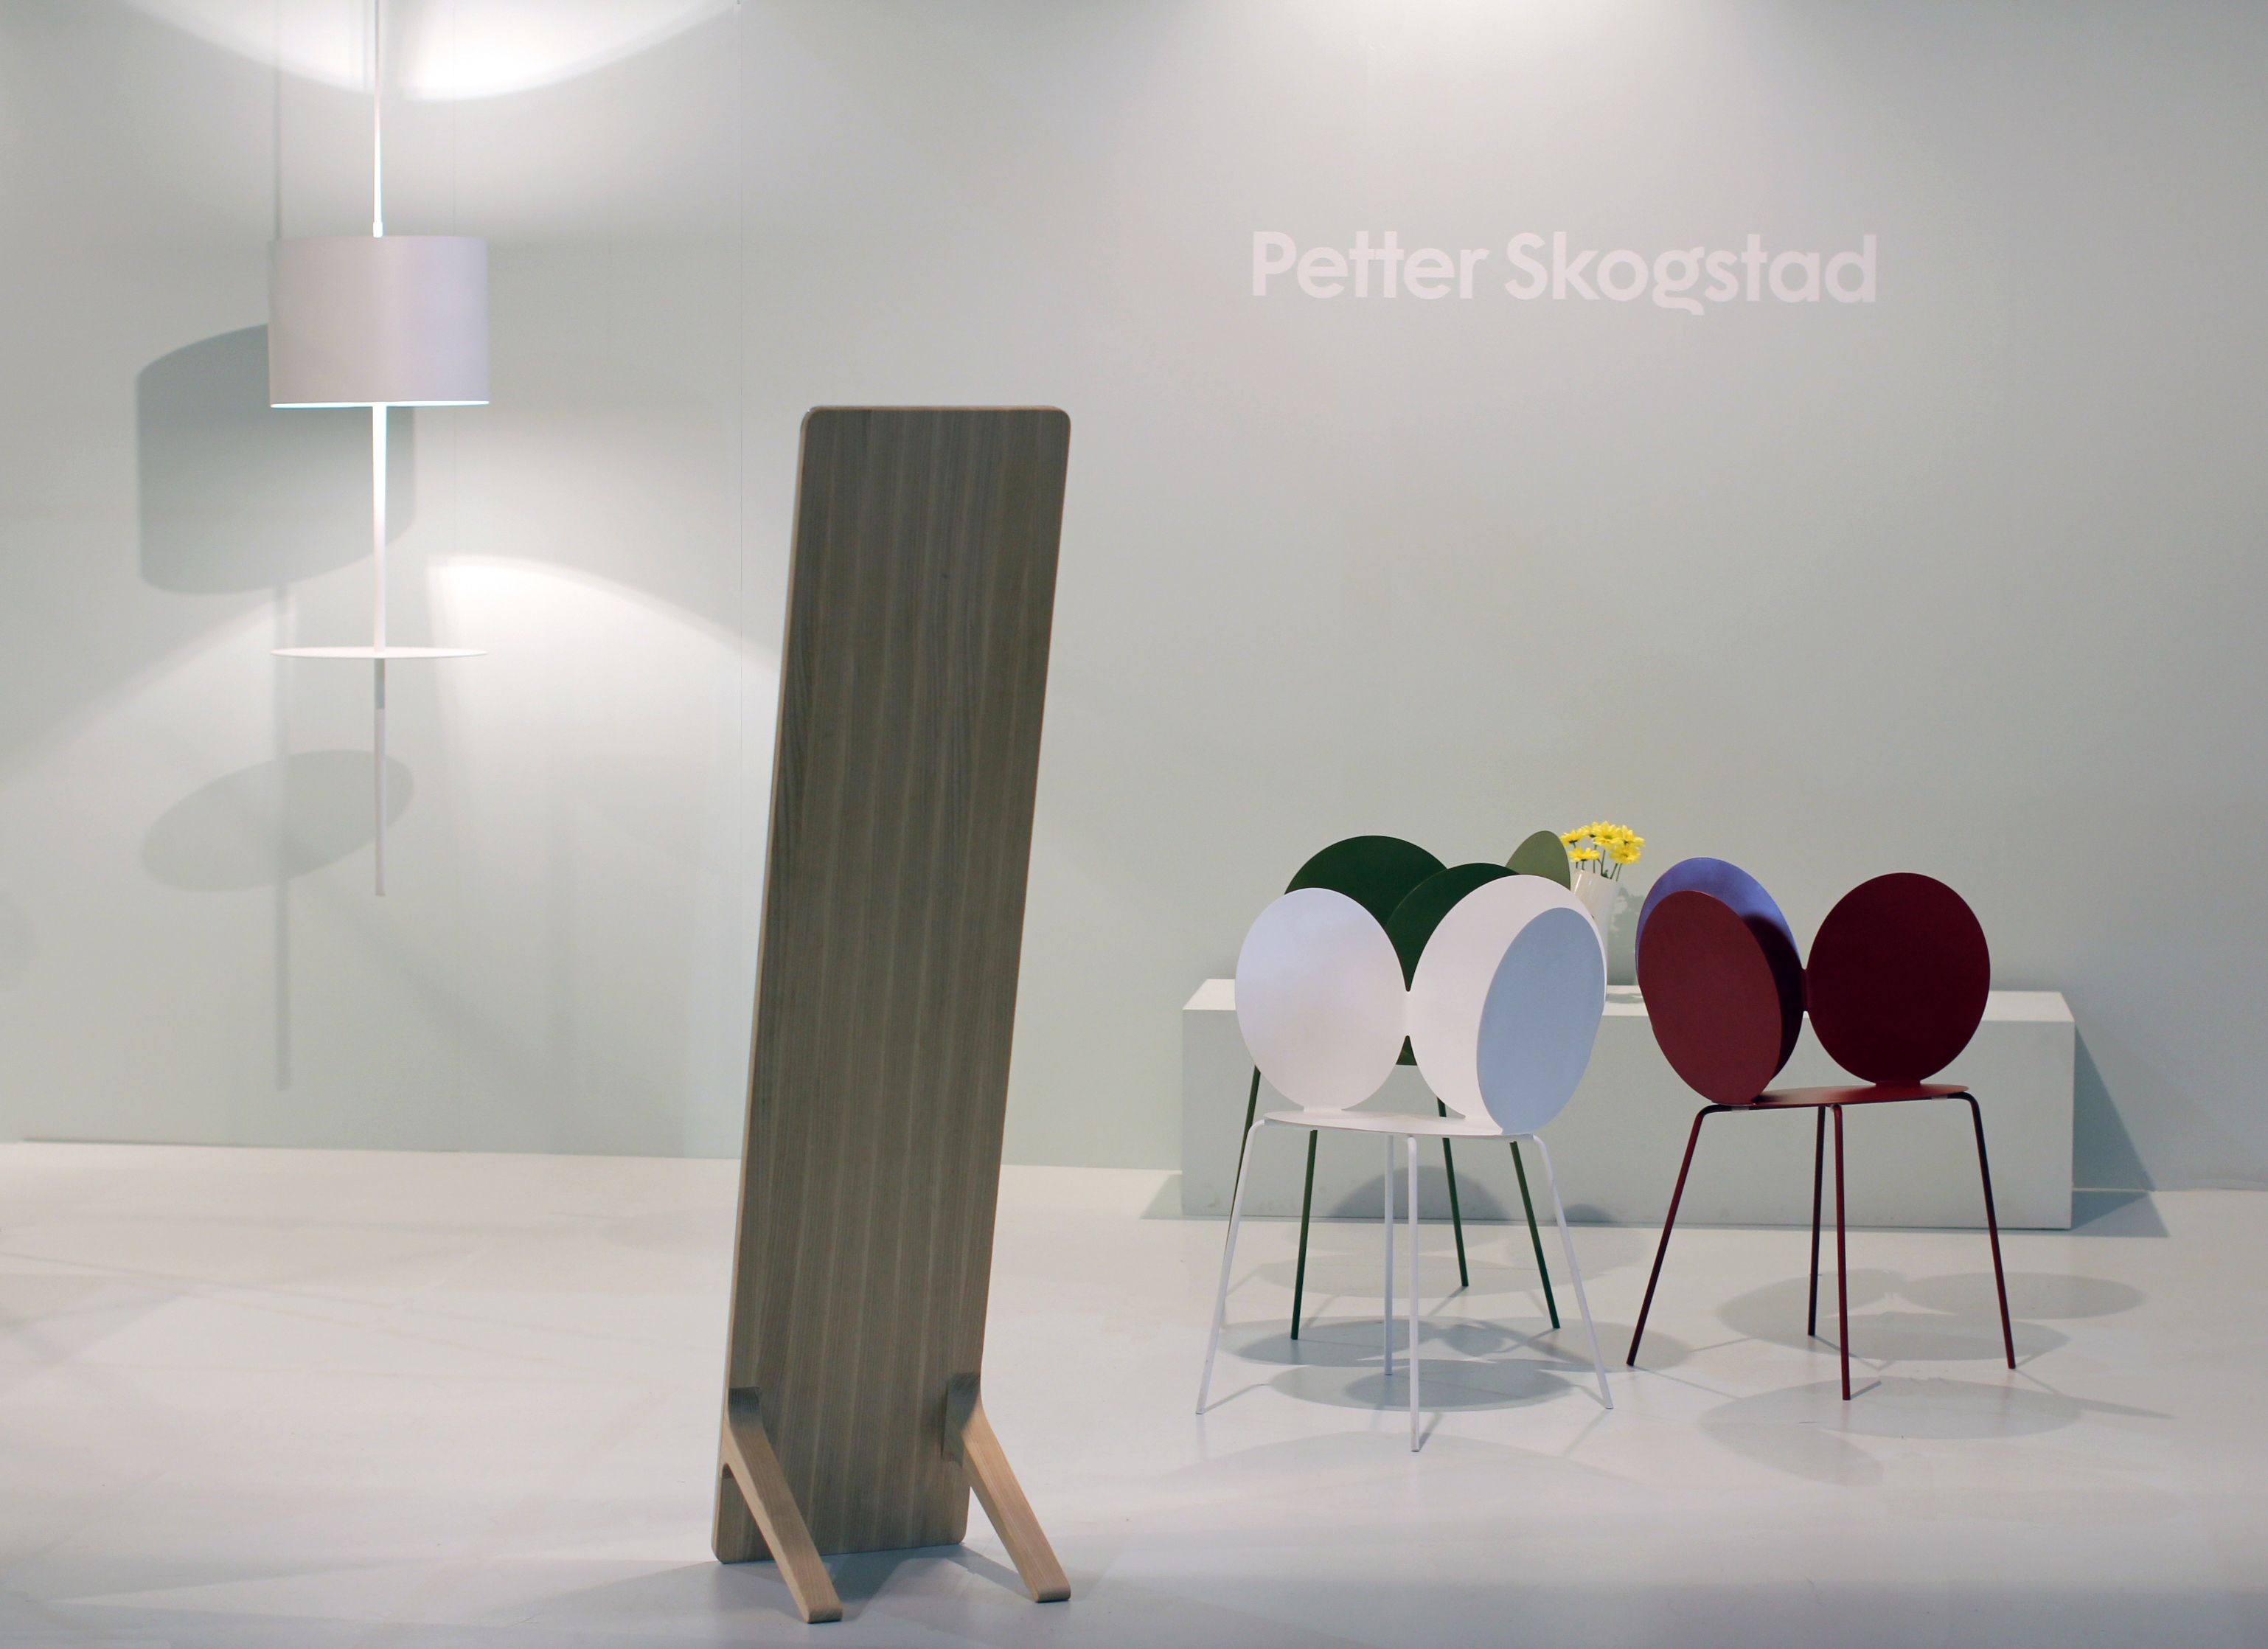 Papercraft Chair Mint" Chairs at Salone Satellite 2010 Designed by Petter Skogstad